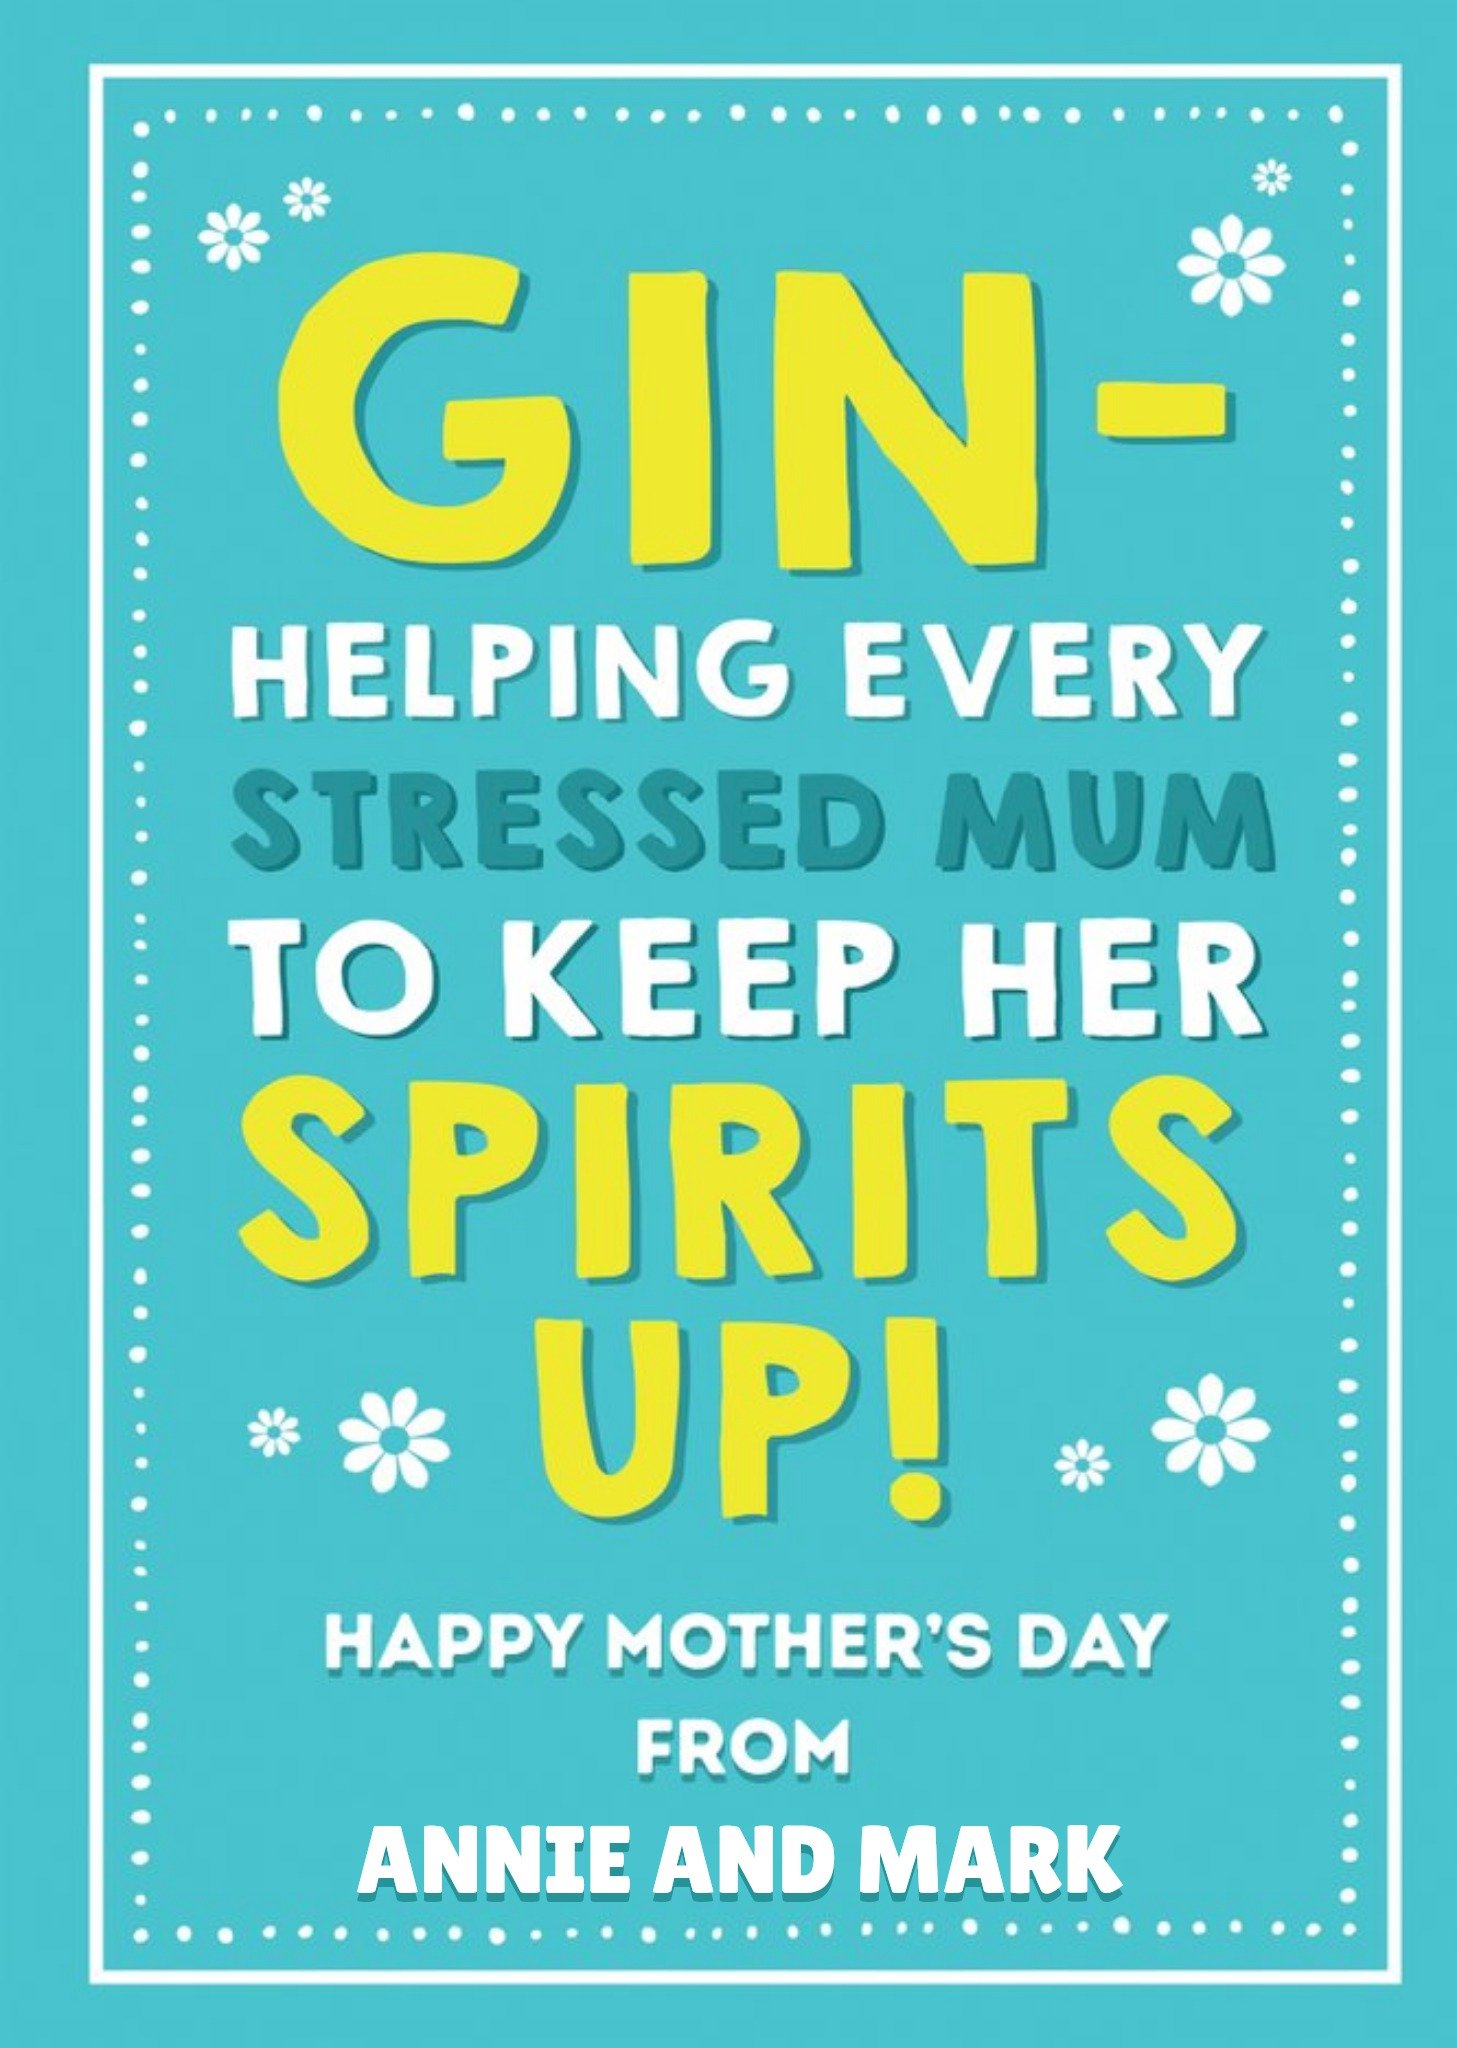 Moonpig Gin Helping Every Stressed Mum To Keep Her Spirits Up Card Ecard